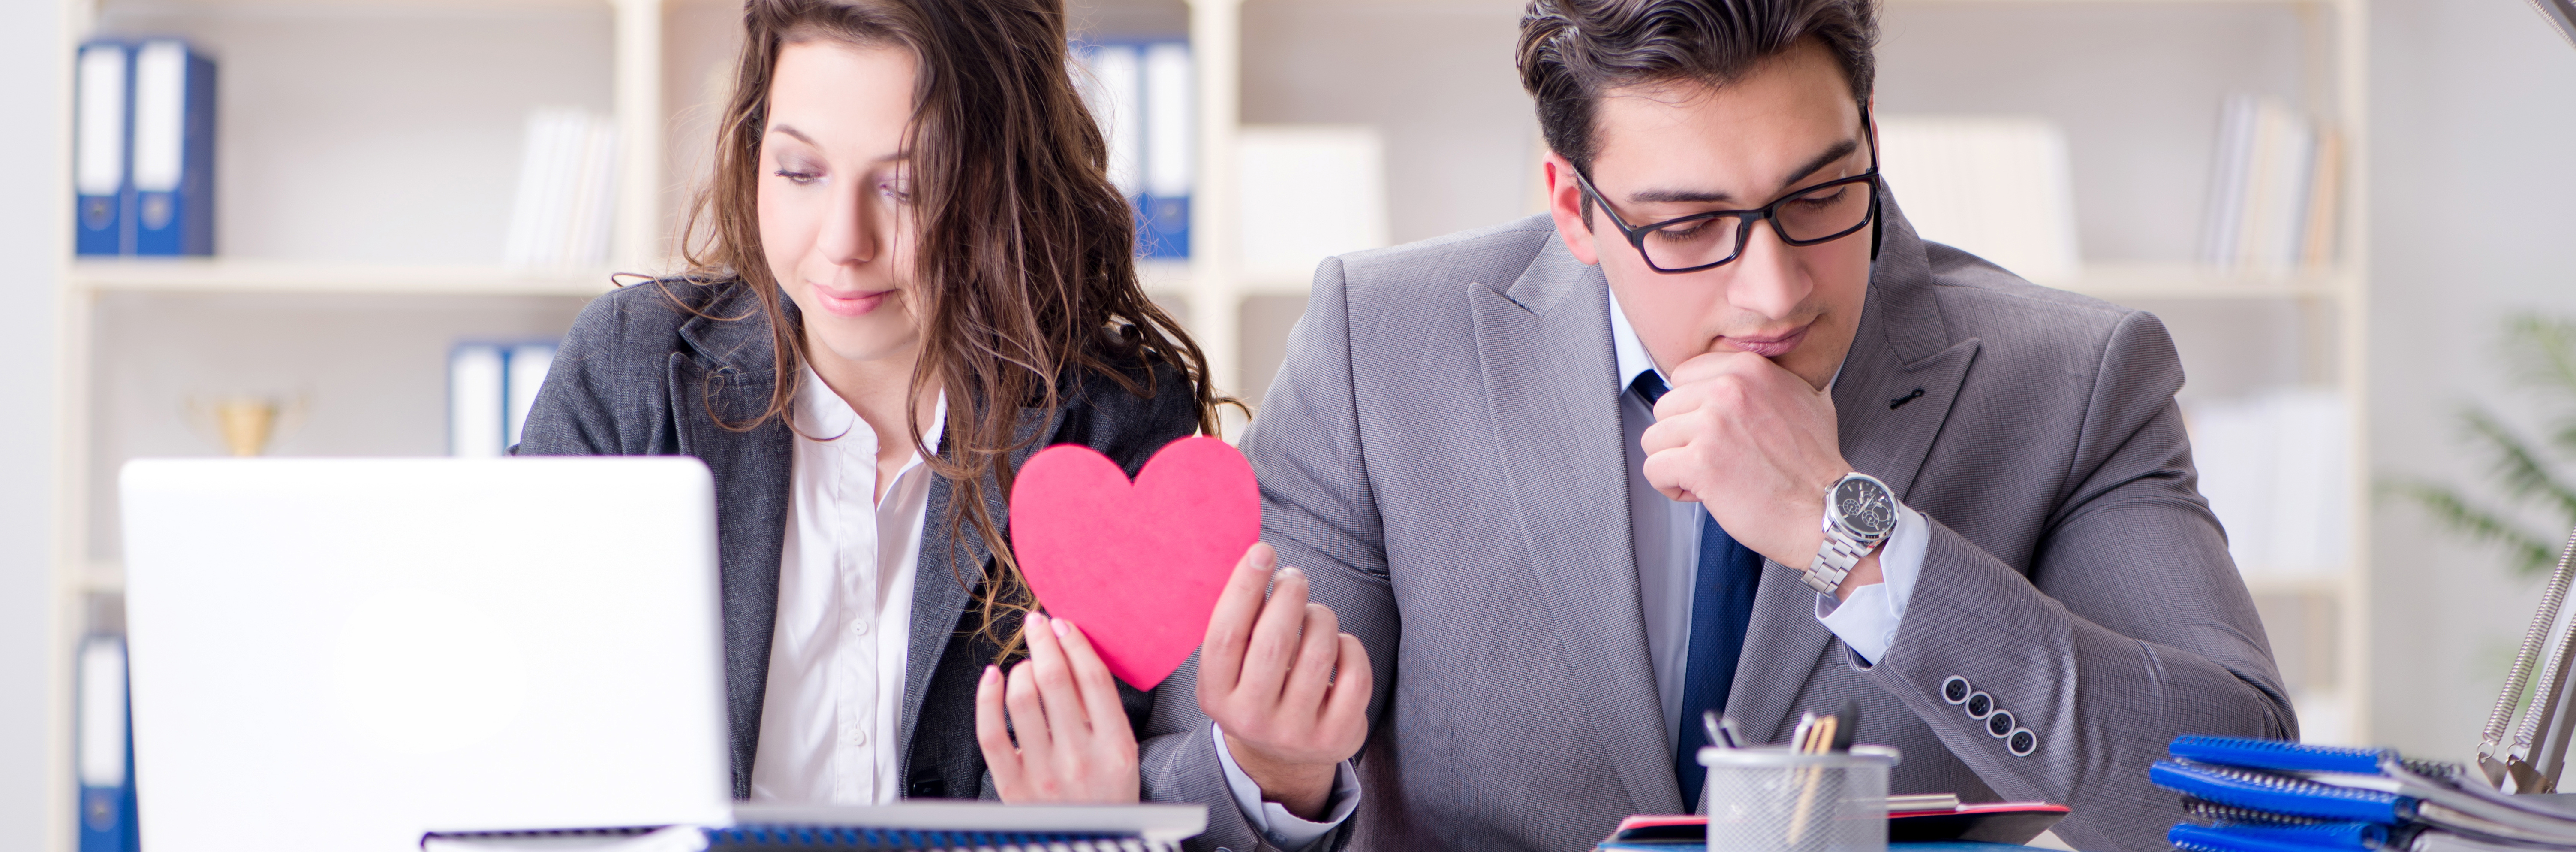 A Consummate Professional's Guide to Office Romance